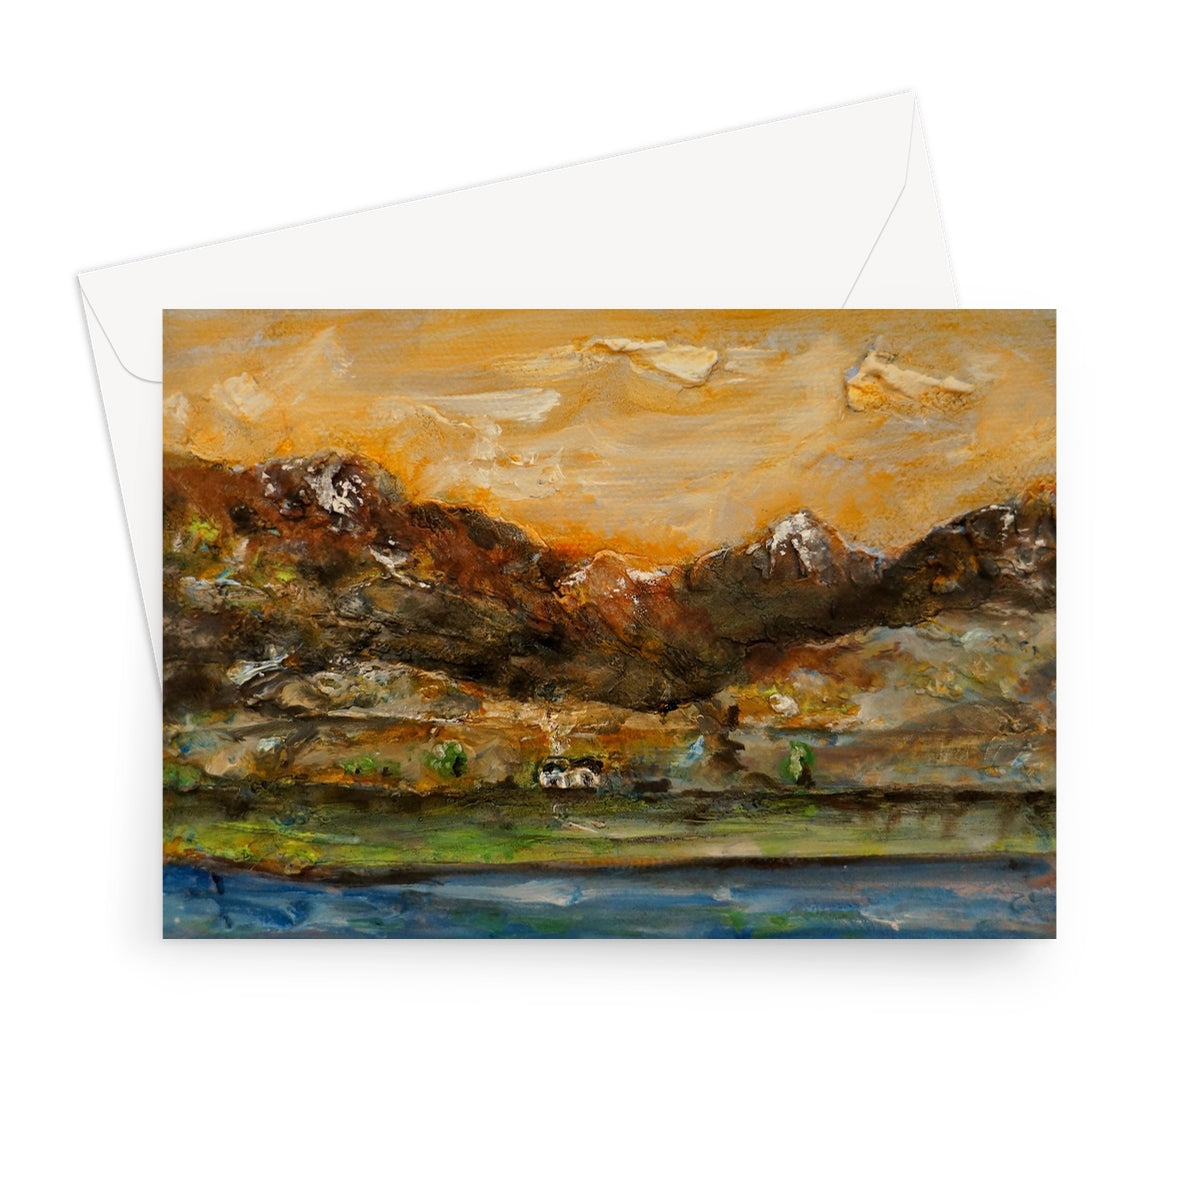 A Glencoe Cottage Art Gifts Greeting Card-Greetings Cards-Glencoe Art Gallery-7"x5"-1 Card-Paintings, Prints, Homeware, Art Gifts From Scotland By Scottish Artist Kevin Hunter